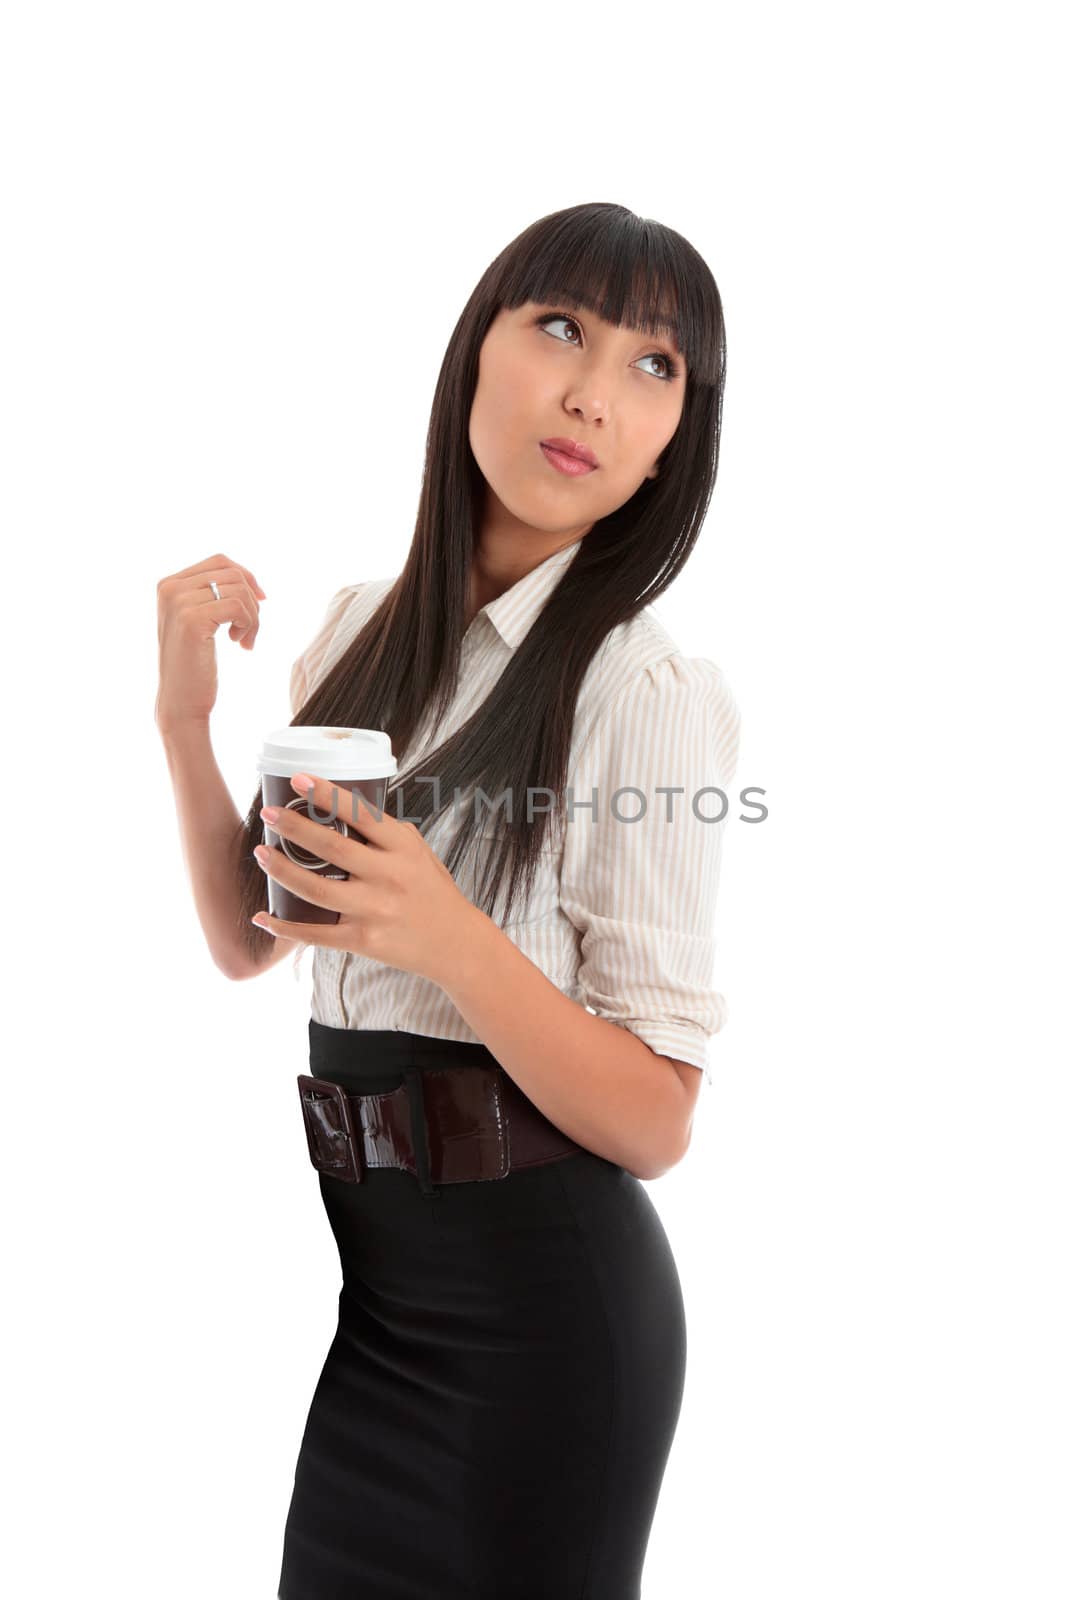 Smart dressed business woman holding a coffee and looking over her shoulder.   Space for copy.   White background.